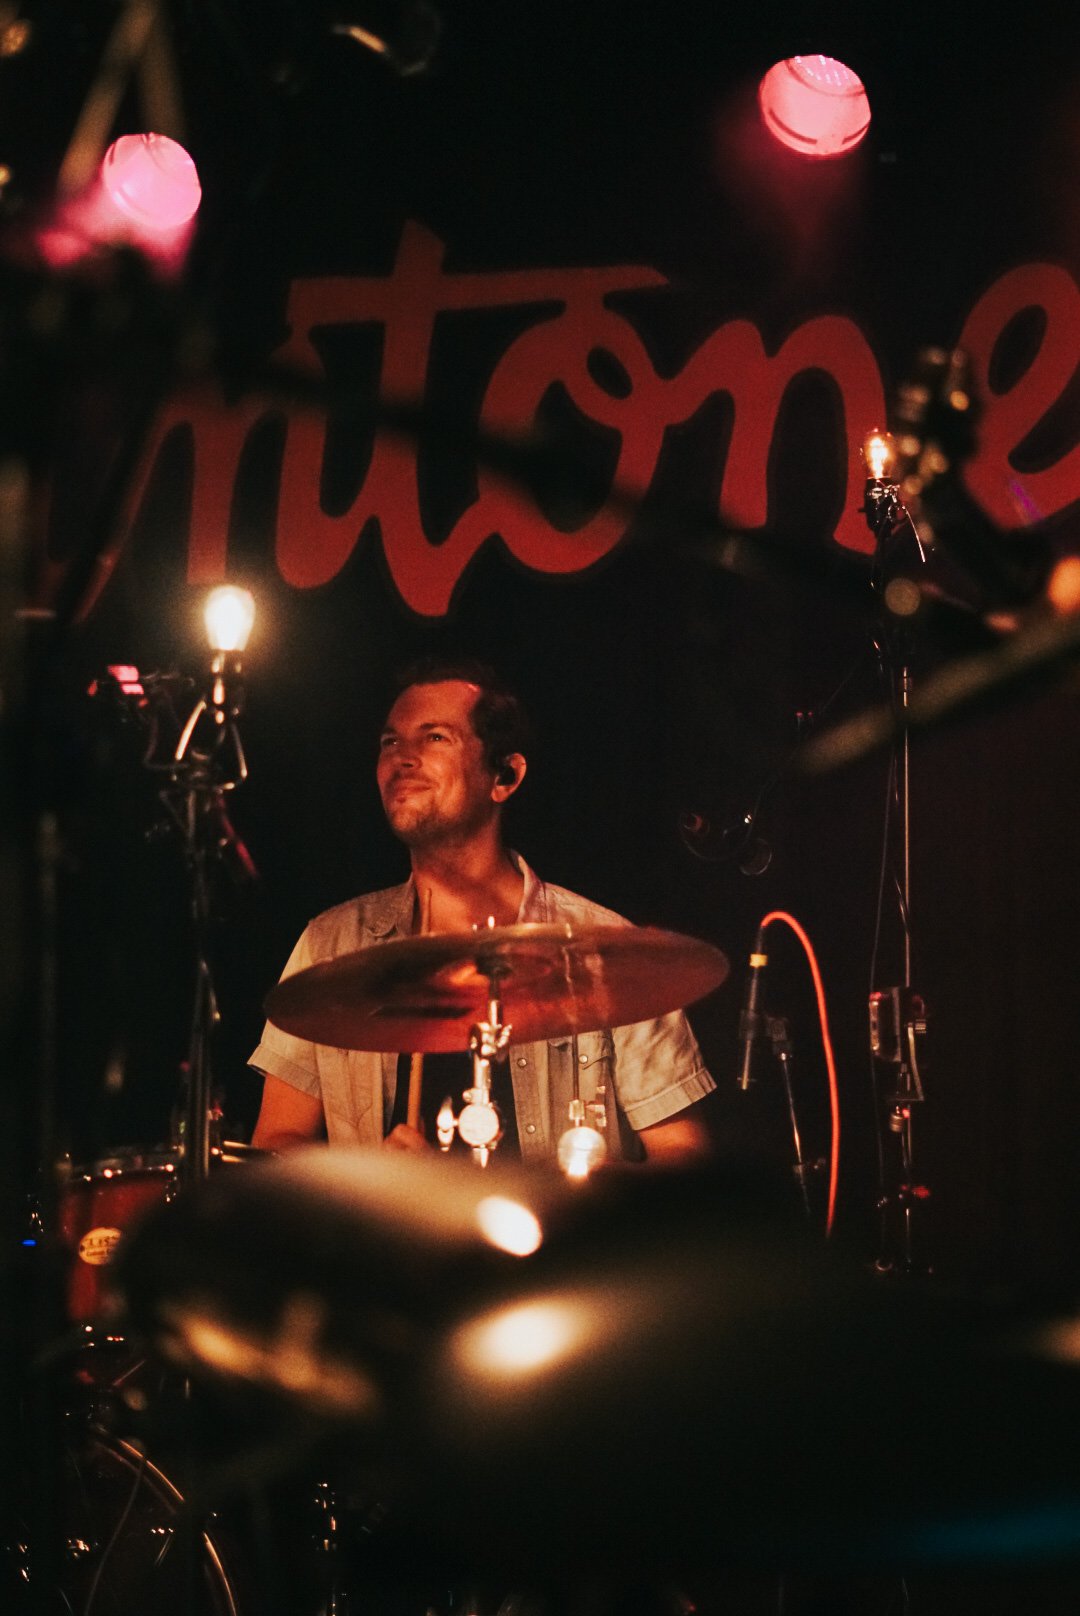  Drummer of BANNERS performs at Antone’s Nightclub.  